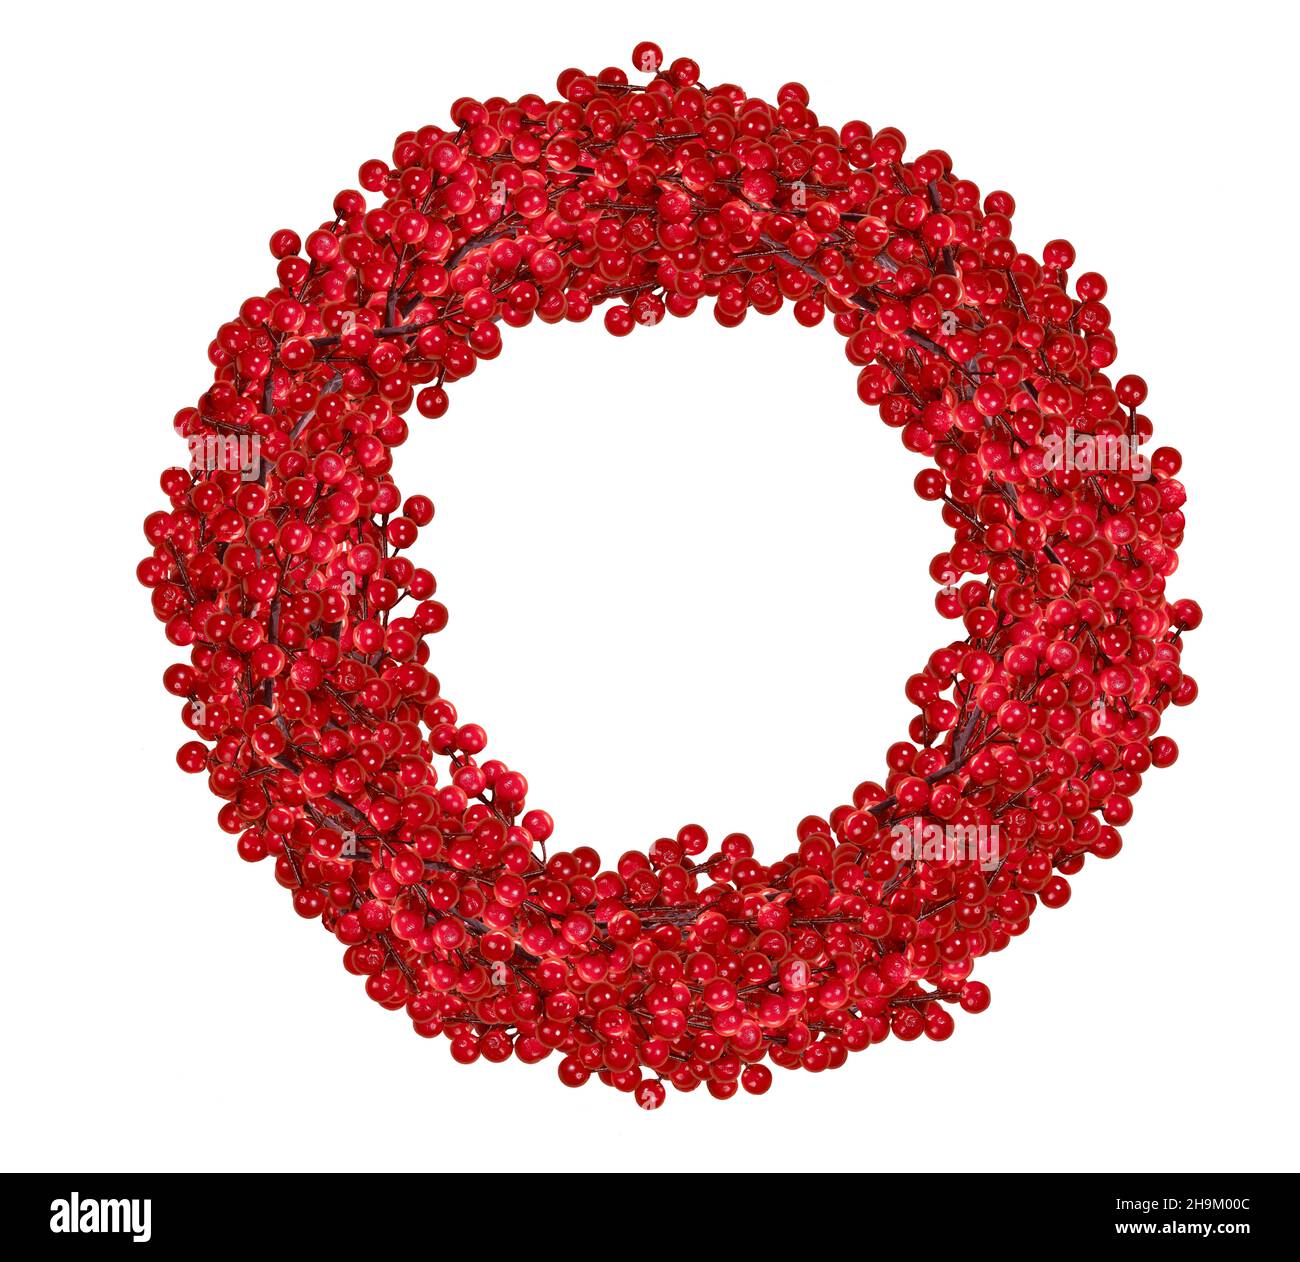 Lush red berry wreath isolated on white background. Christmas holiday decoration. Door ornament. Stock Photo